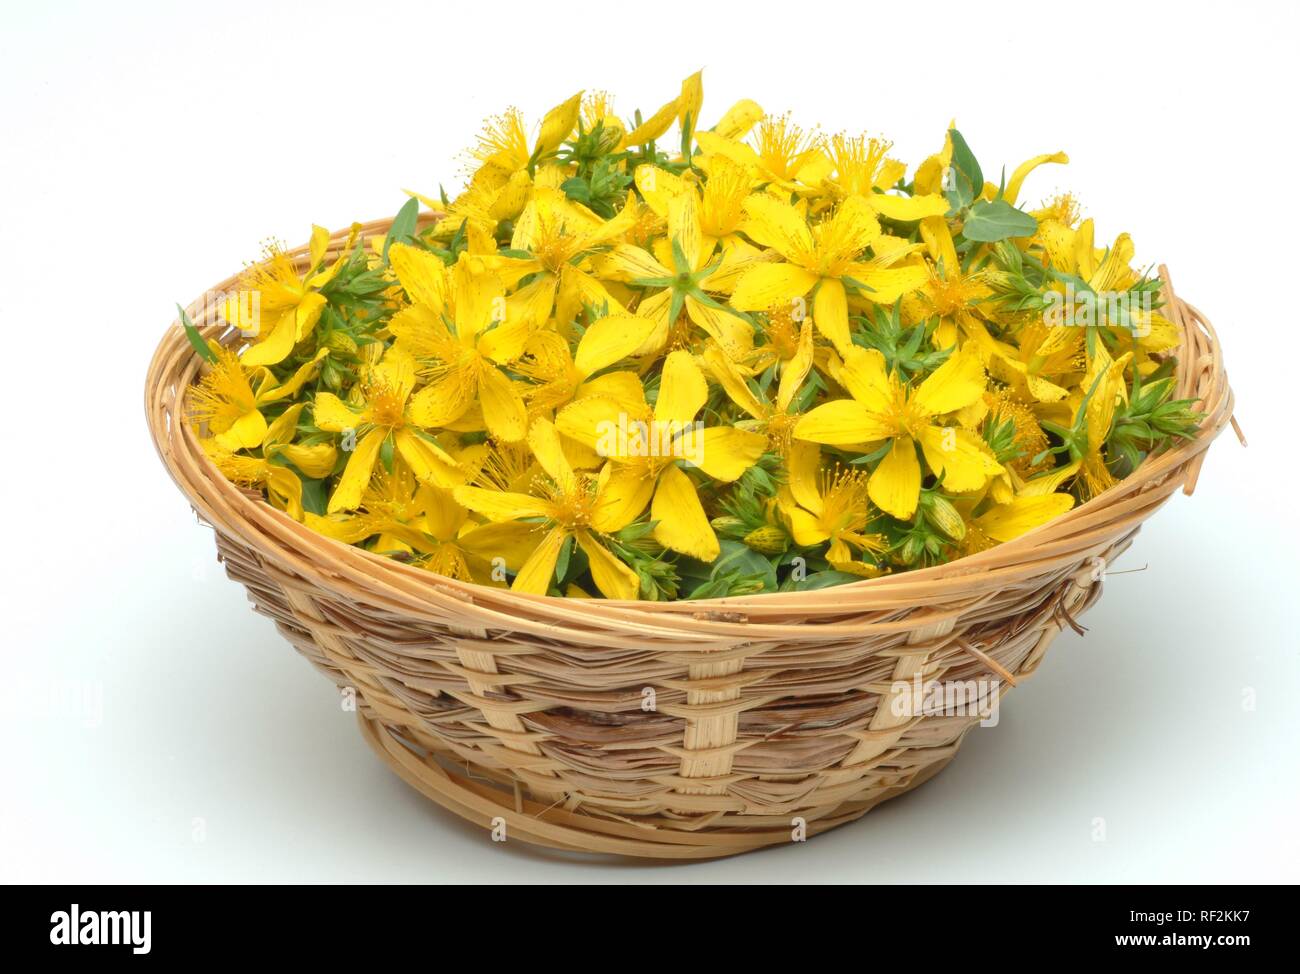 St. John´s Wort (Hypericum perforatum), medicinal plant, blossoms collected in a basket Stock Photo